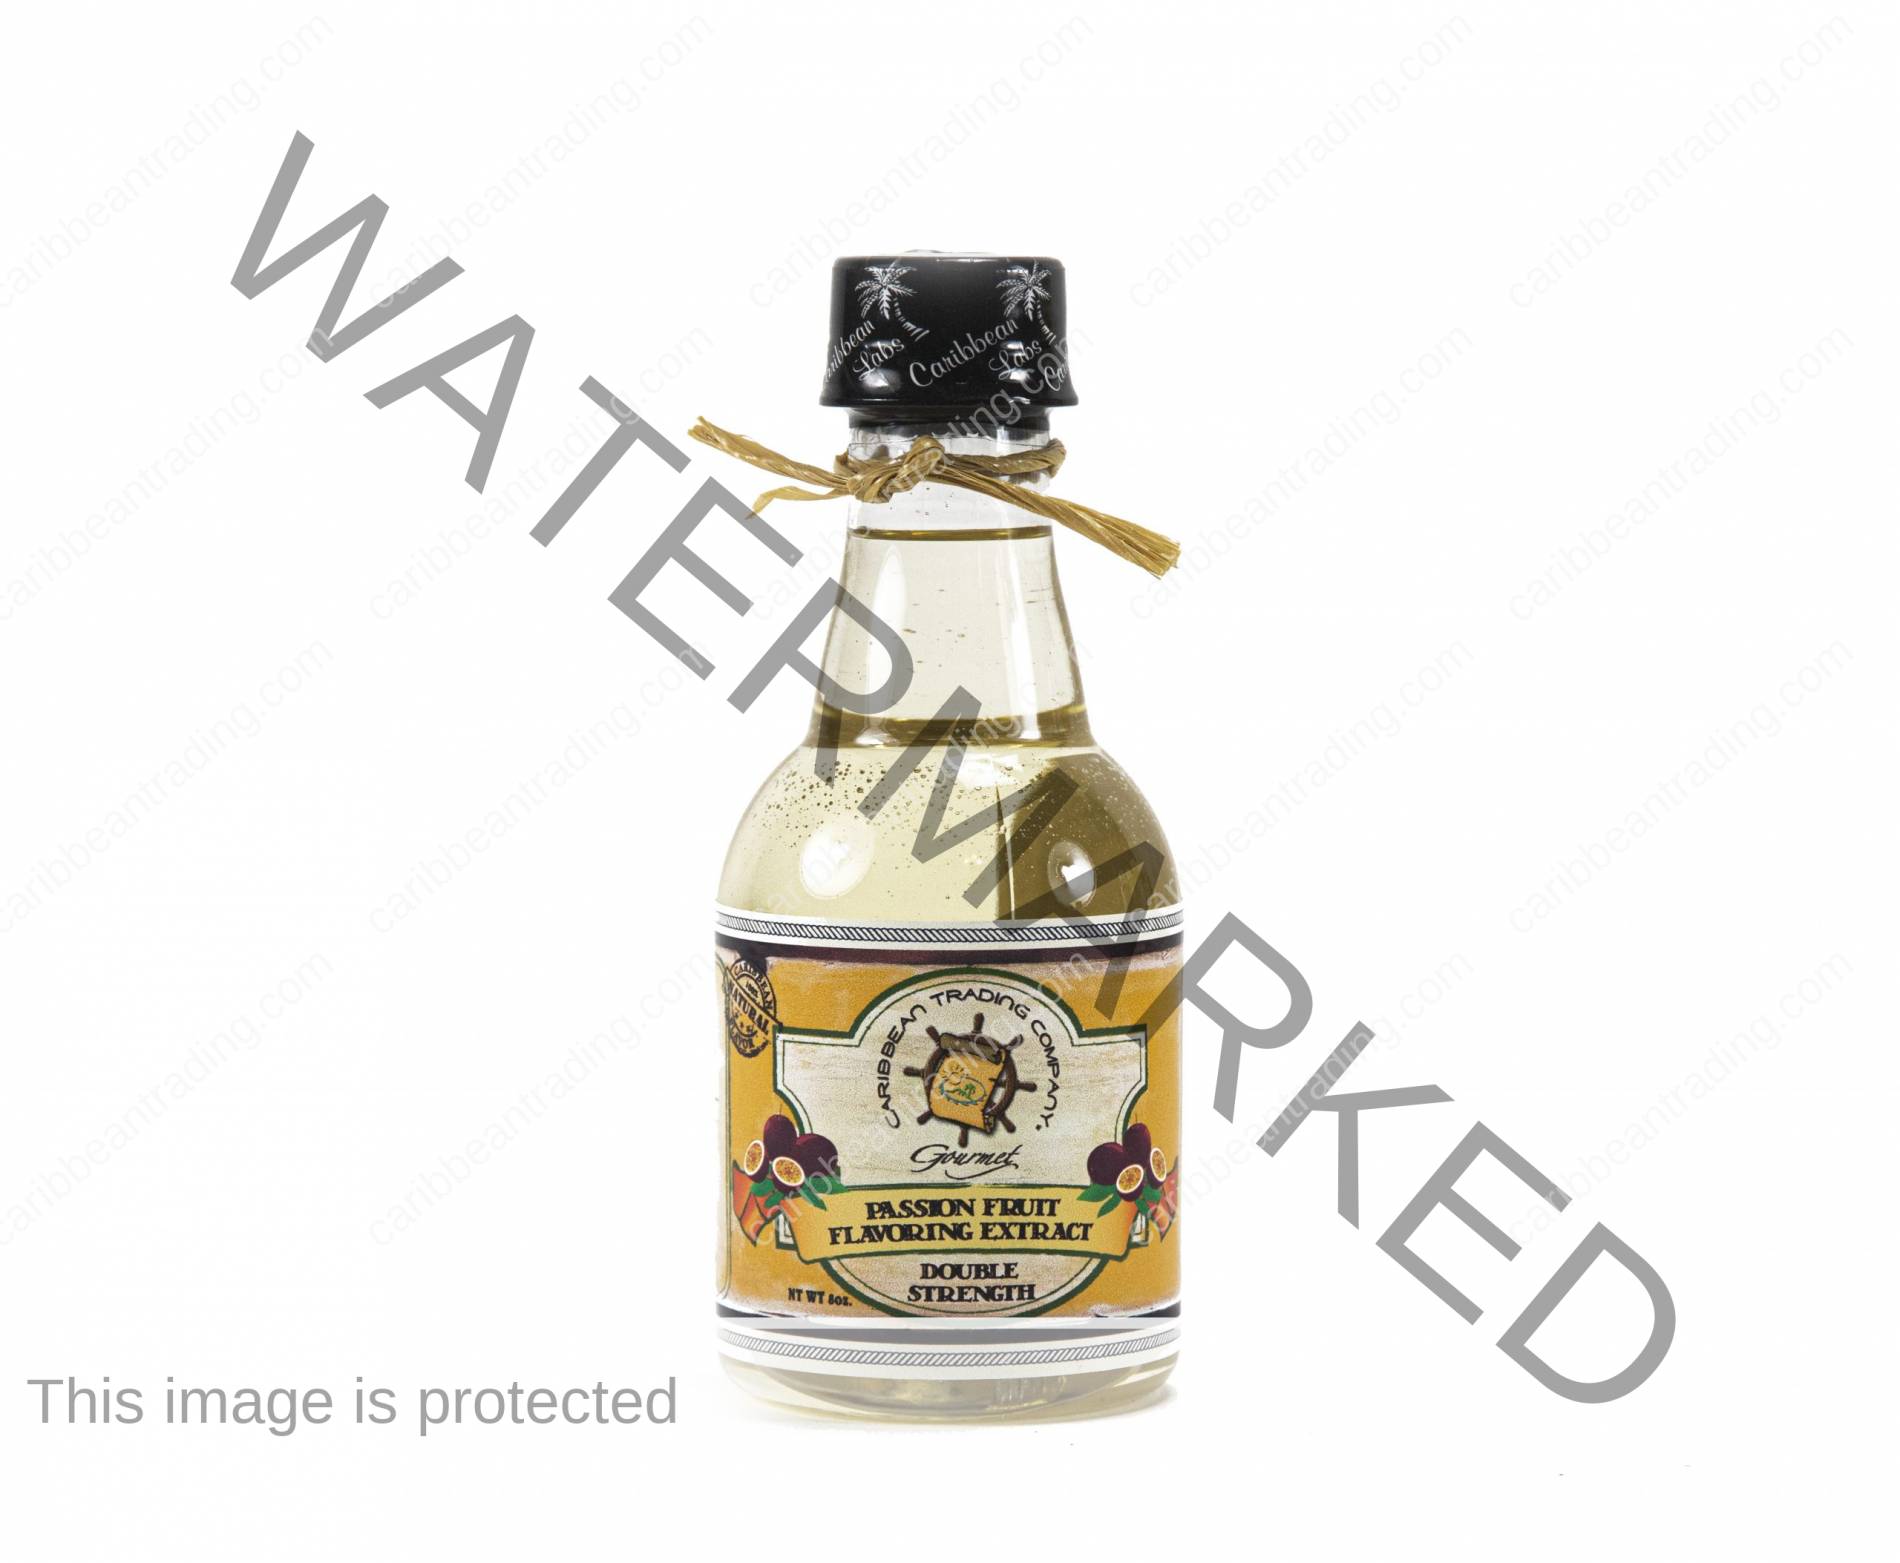 Passion Fruit Extract - 8 oz.